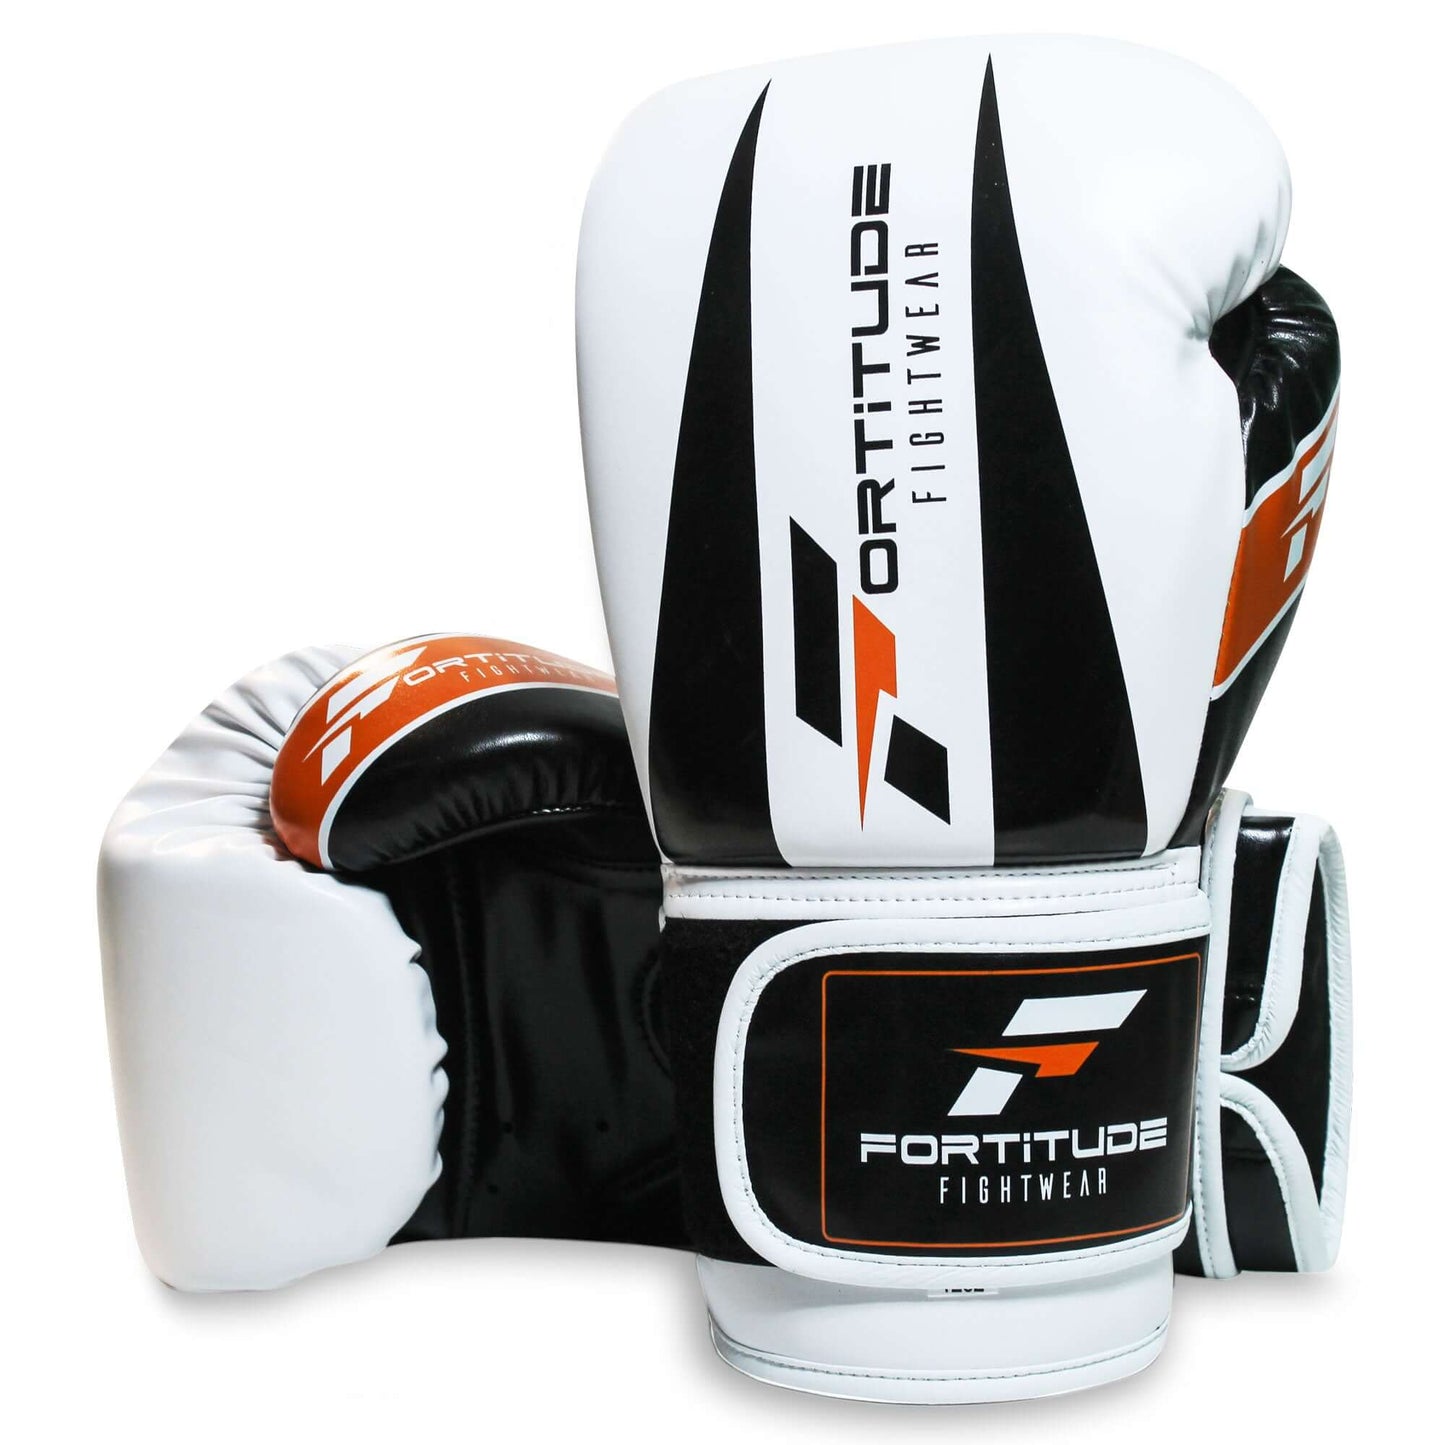 Fortitude Fightwear Leather Boxing Gloves